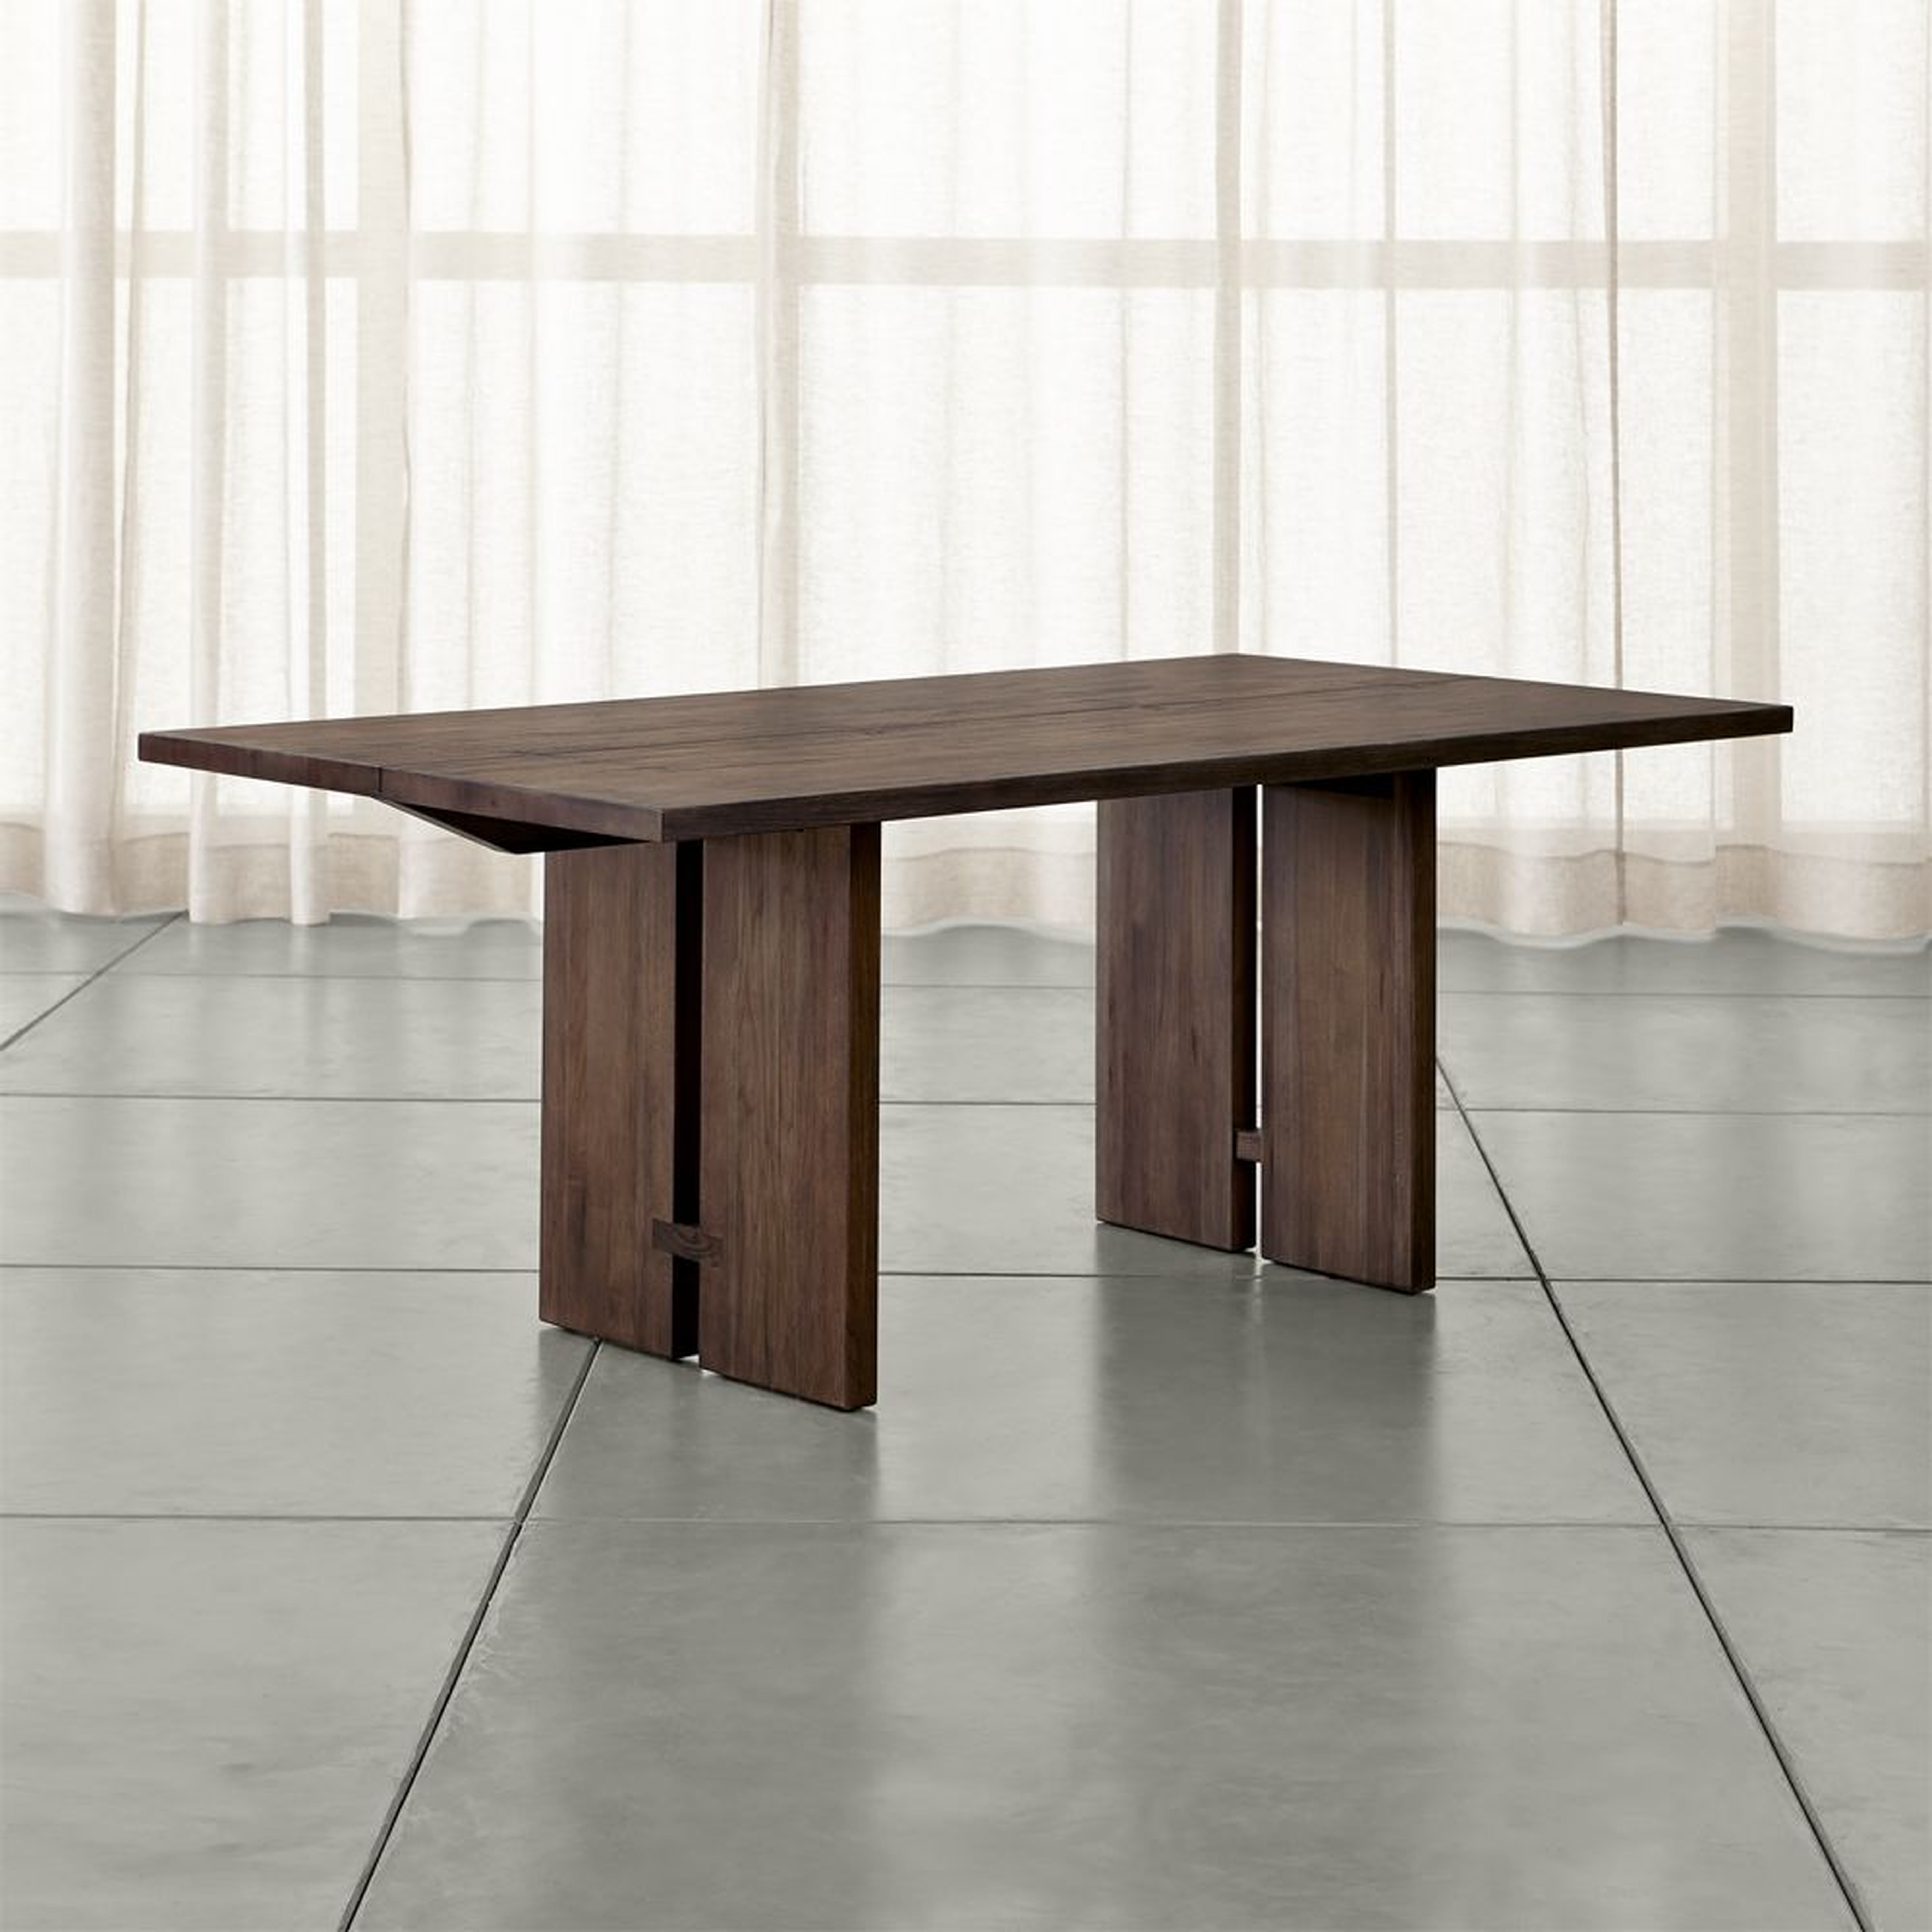 Monarch Shiitake 76" Dining Table - Crate and Barrel